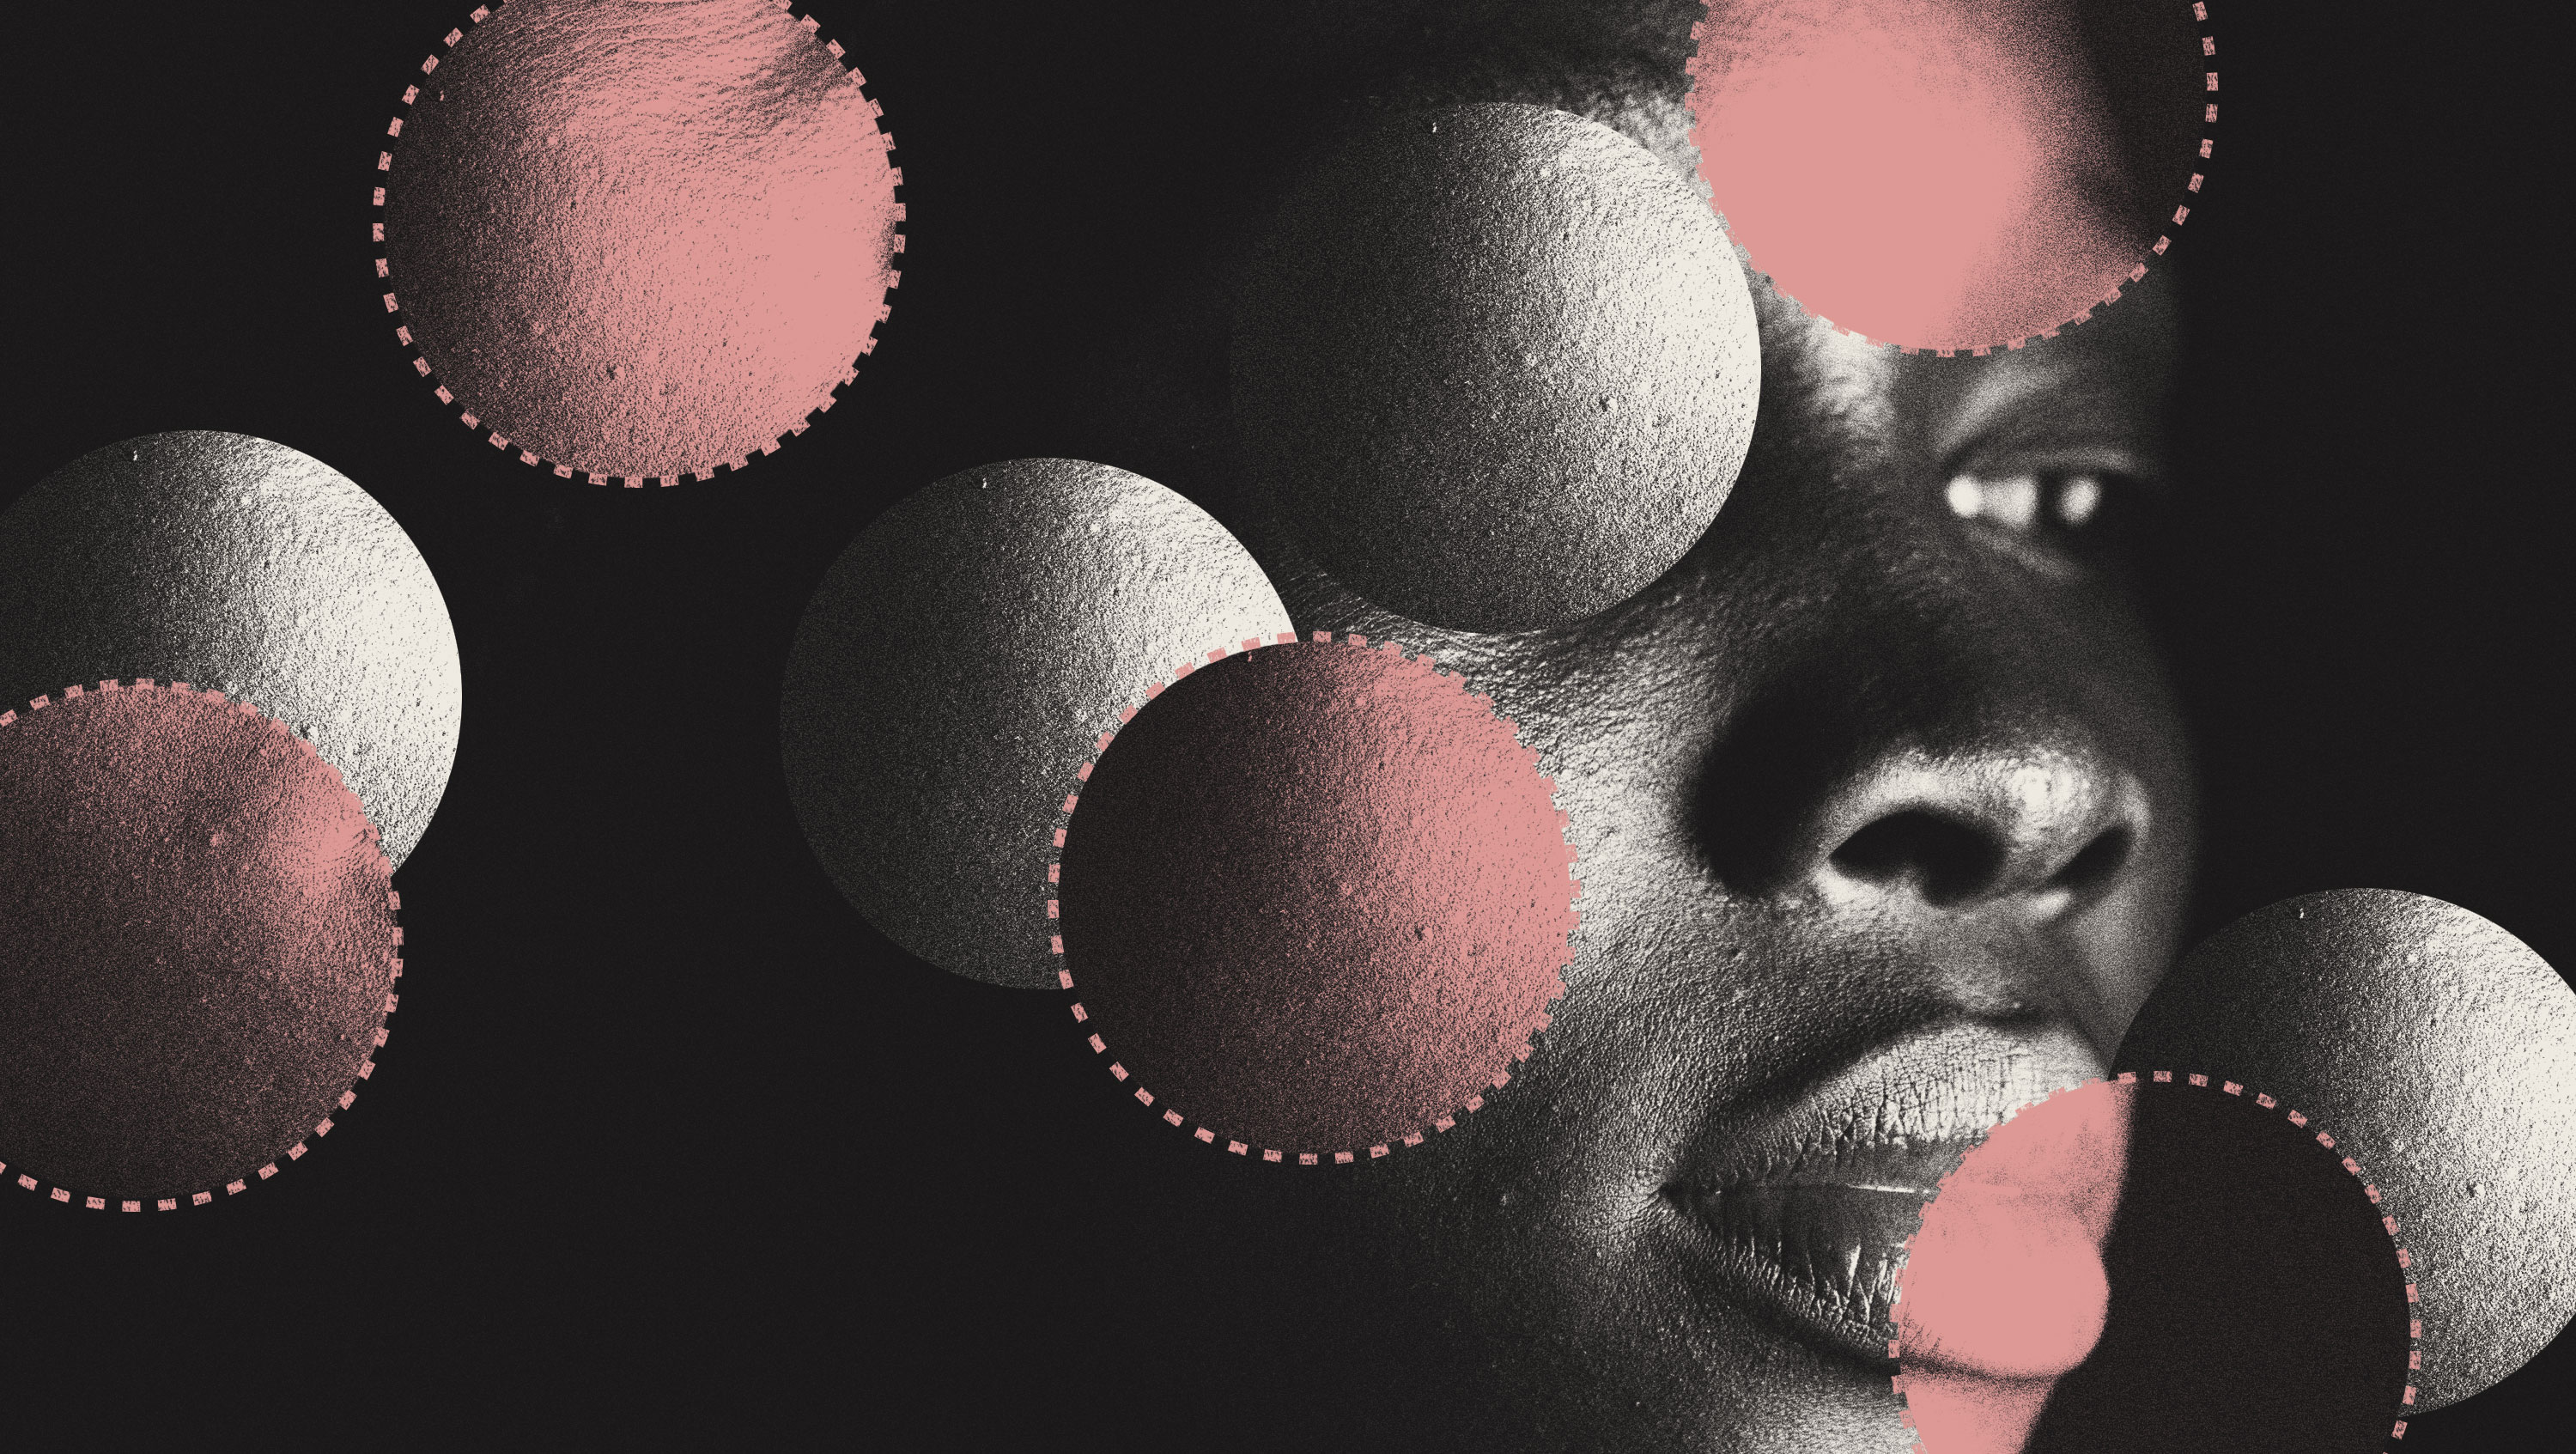 Conceptual illustration of a young black woman's face with circles that zoom in on certain features, image is black and white with pink highlights